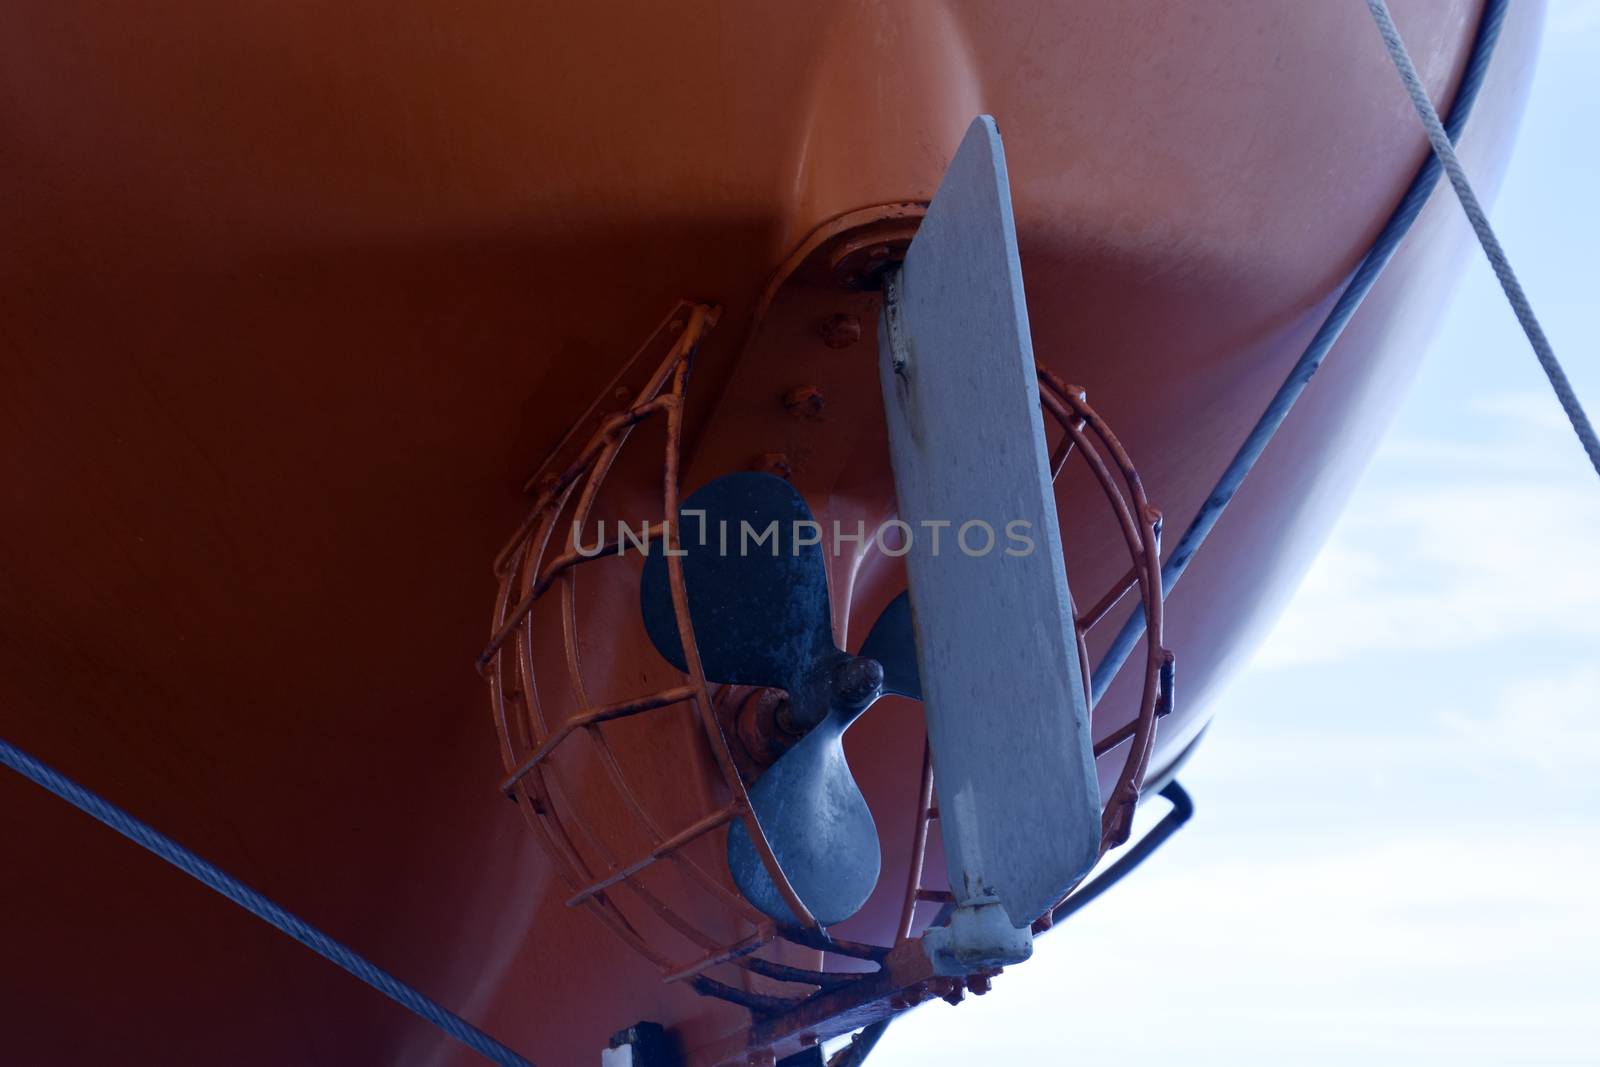 lifeboat on a commercial ship